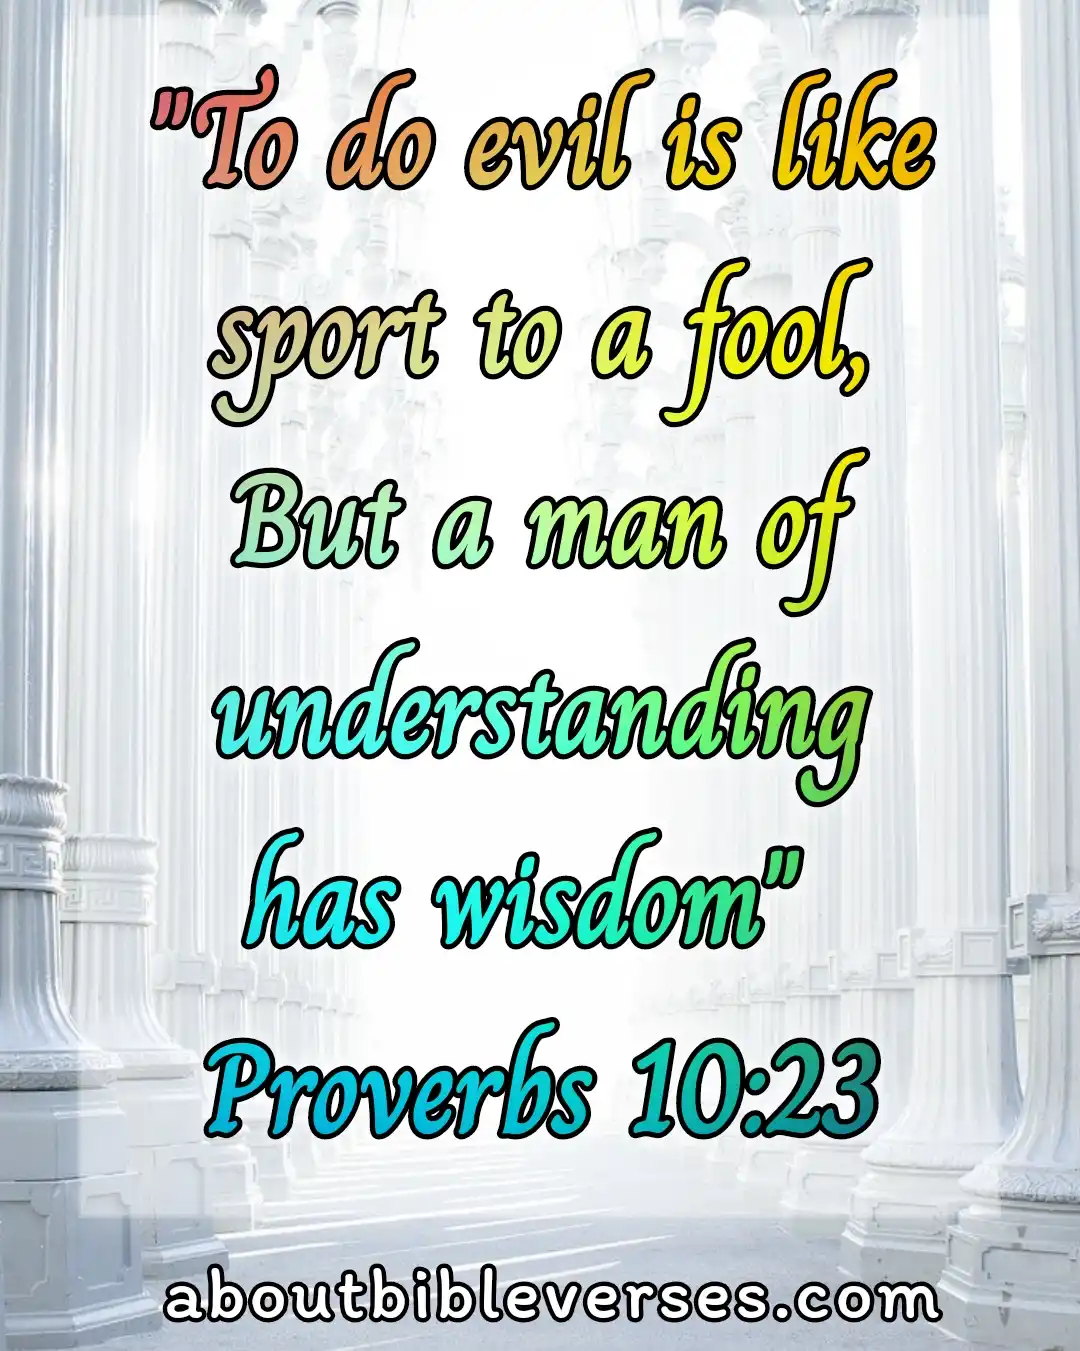 bible verses about fool (Proverbs 10:23)